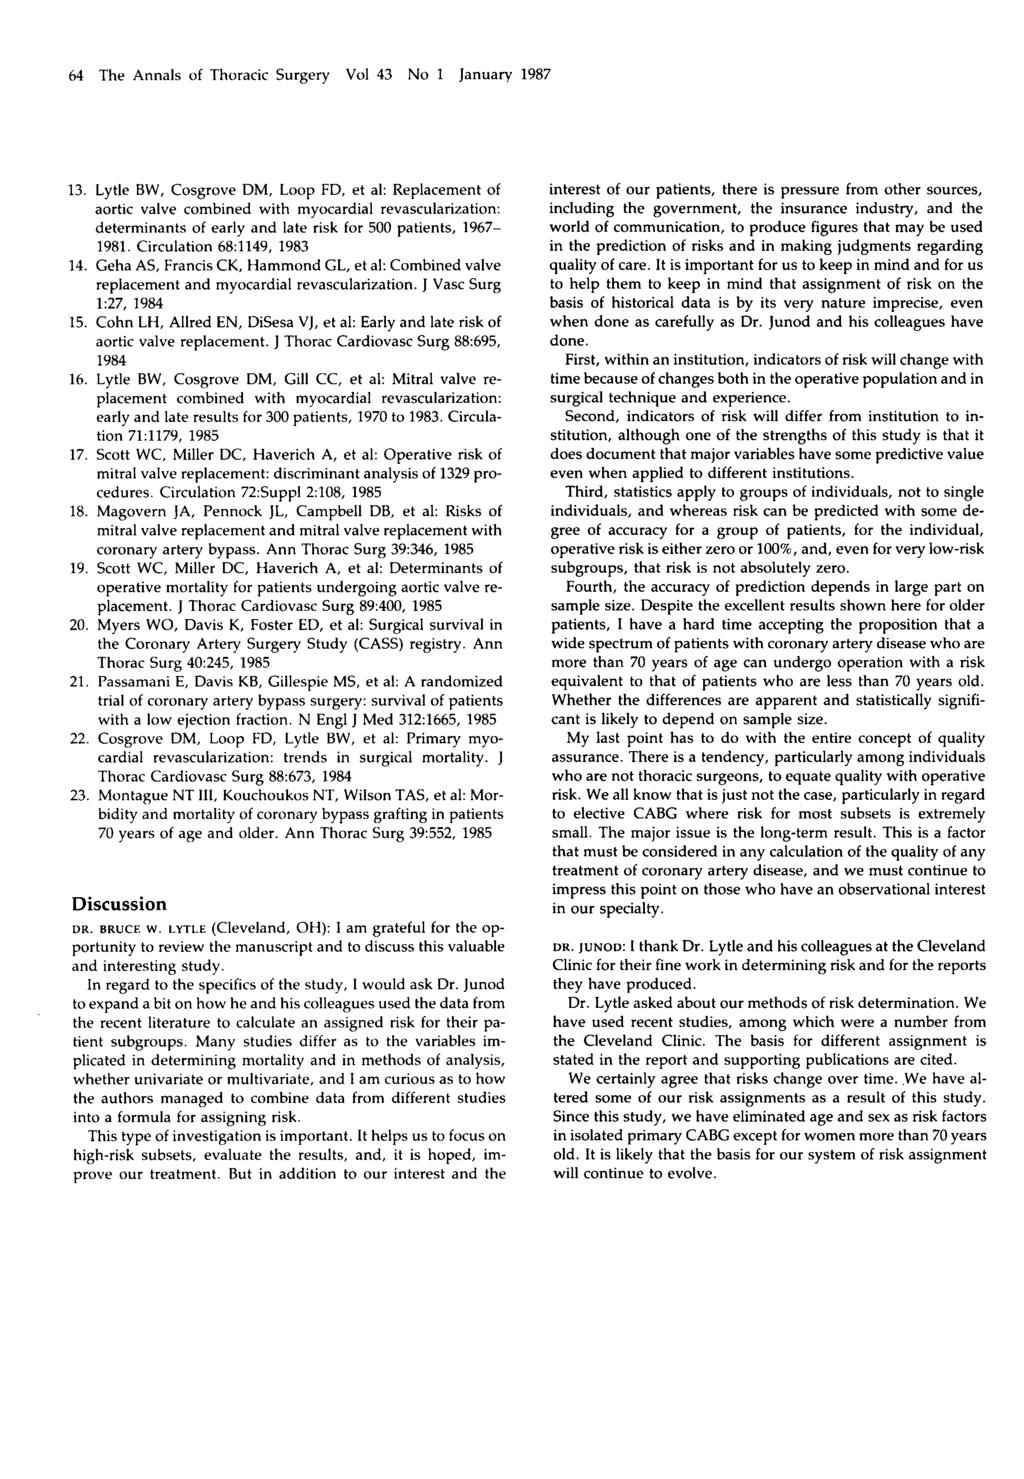 64 The Annals of Thoracic Surgery Vol 43 No 1 January 1987 13.